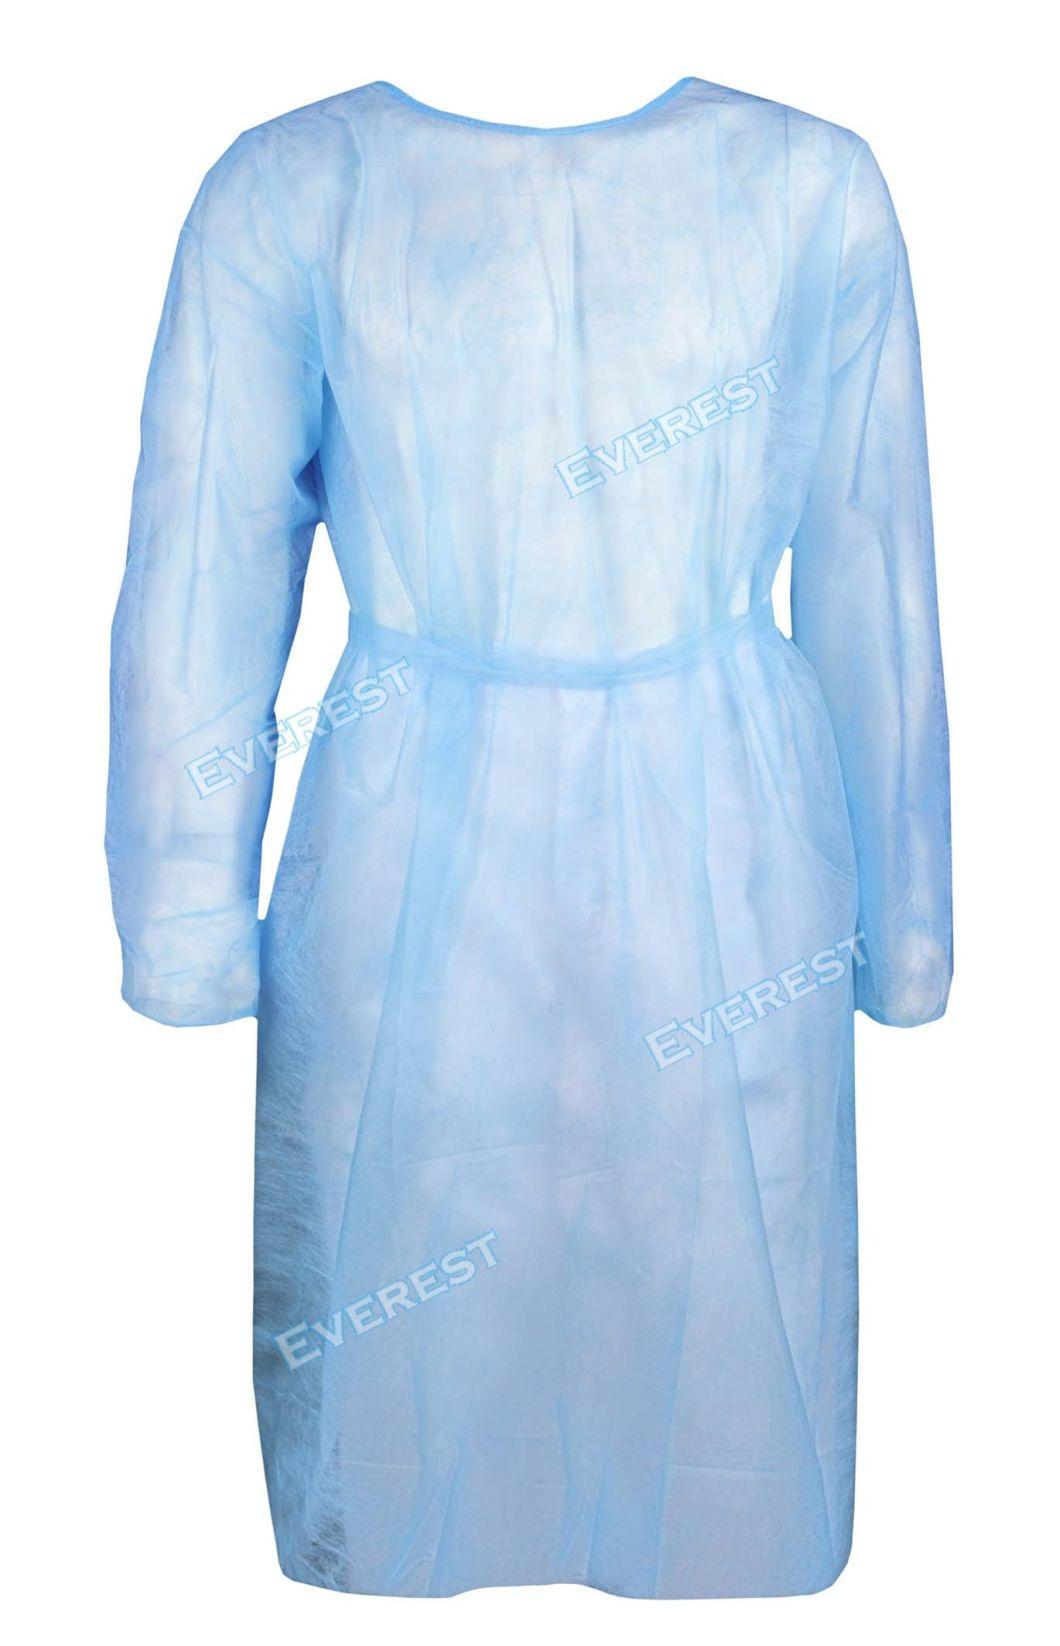 Eco/Standard Isolation Gowns for Visitors